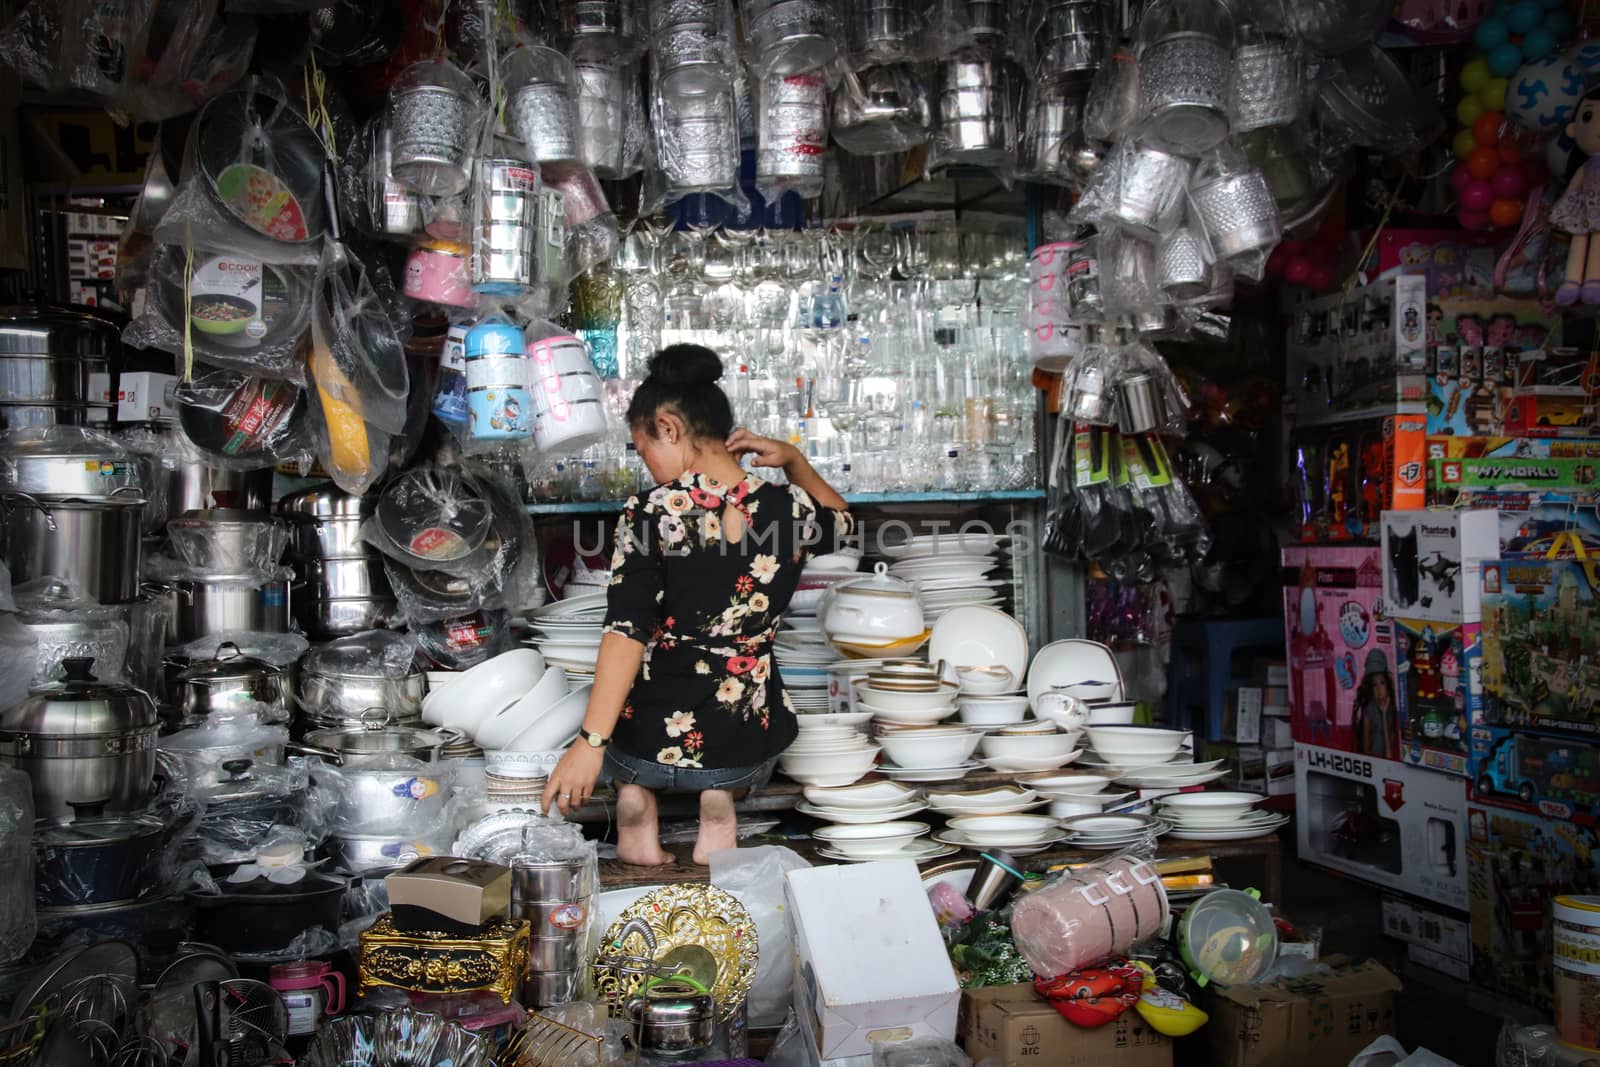 Editorial. A Cambodian woman sitting in her crowded market stall in Phnom Pehn Cambodia